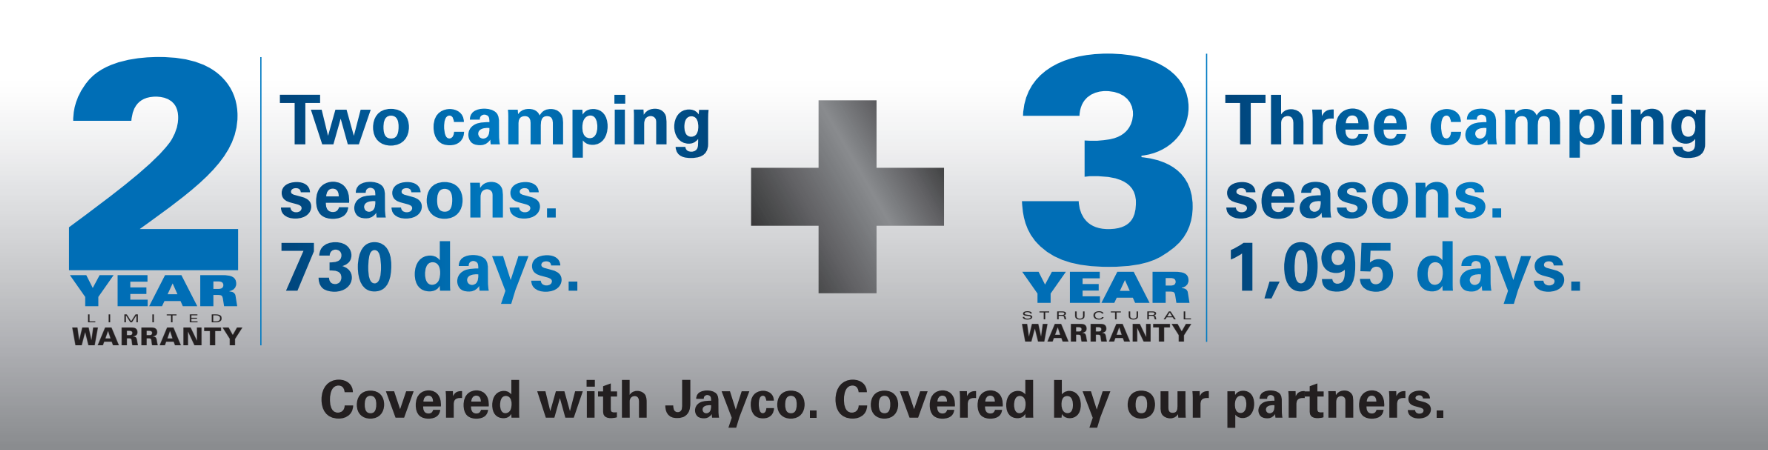 Jayco Covered areas